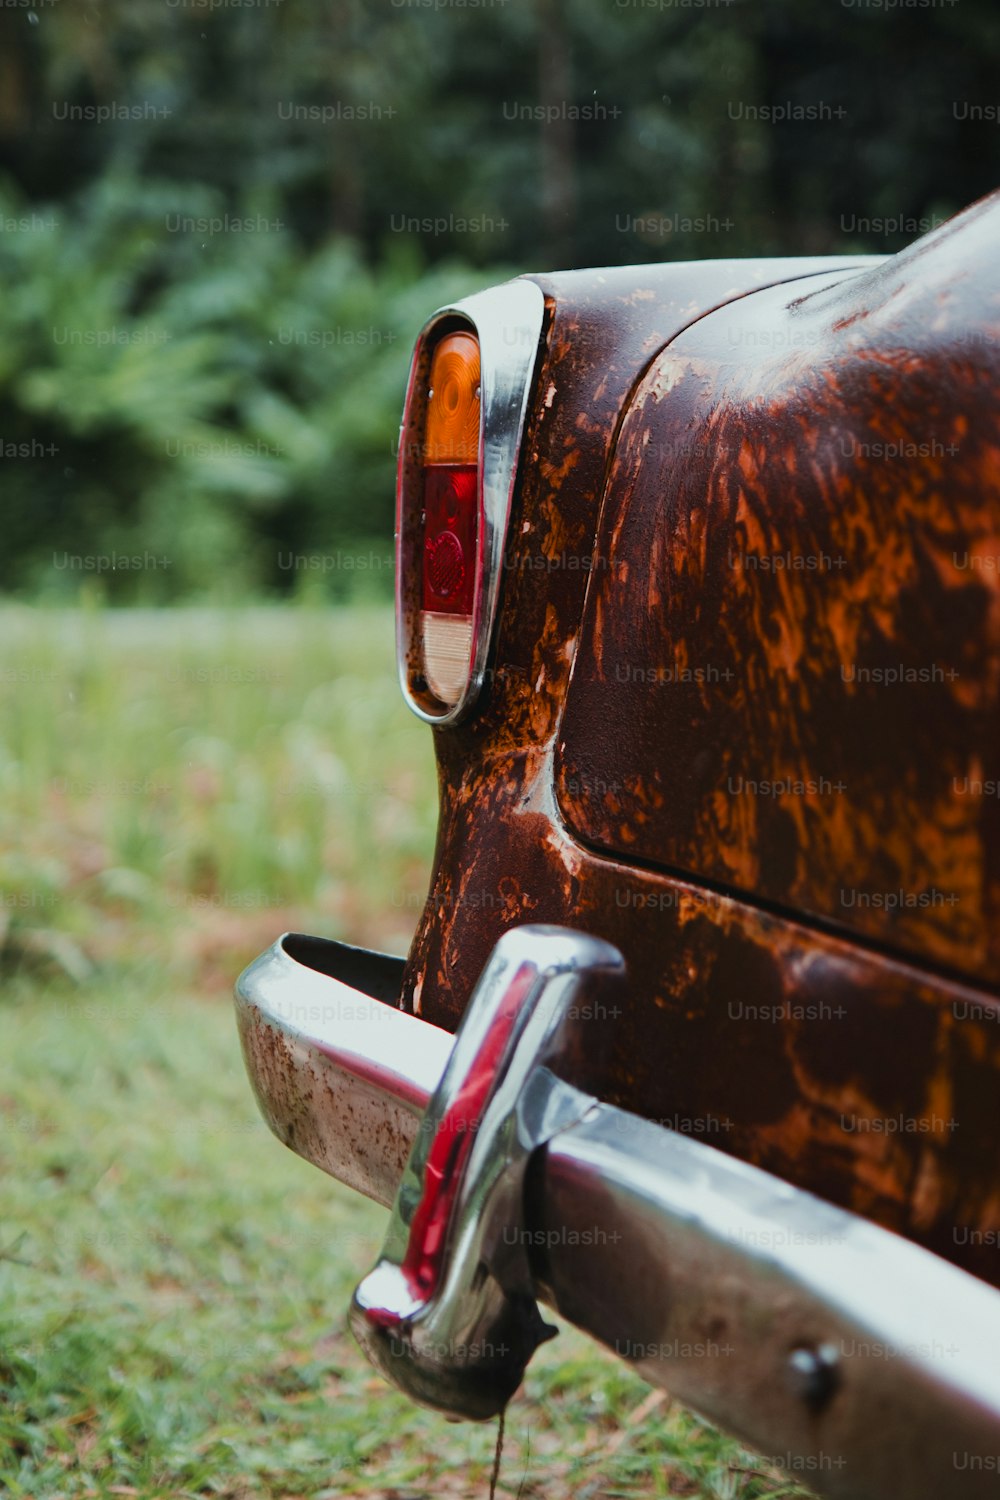 a rusted old car parked in a field